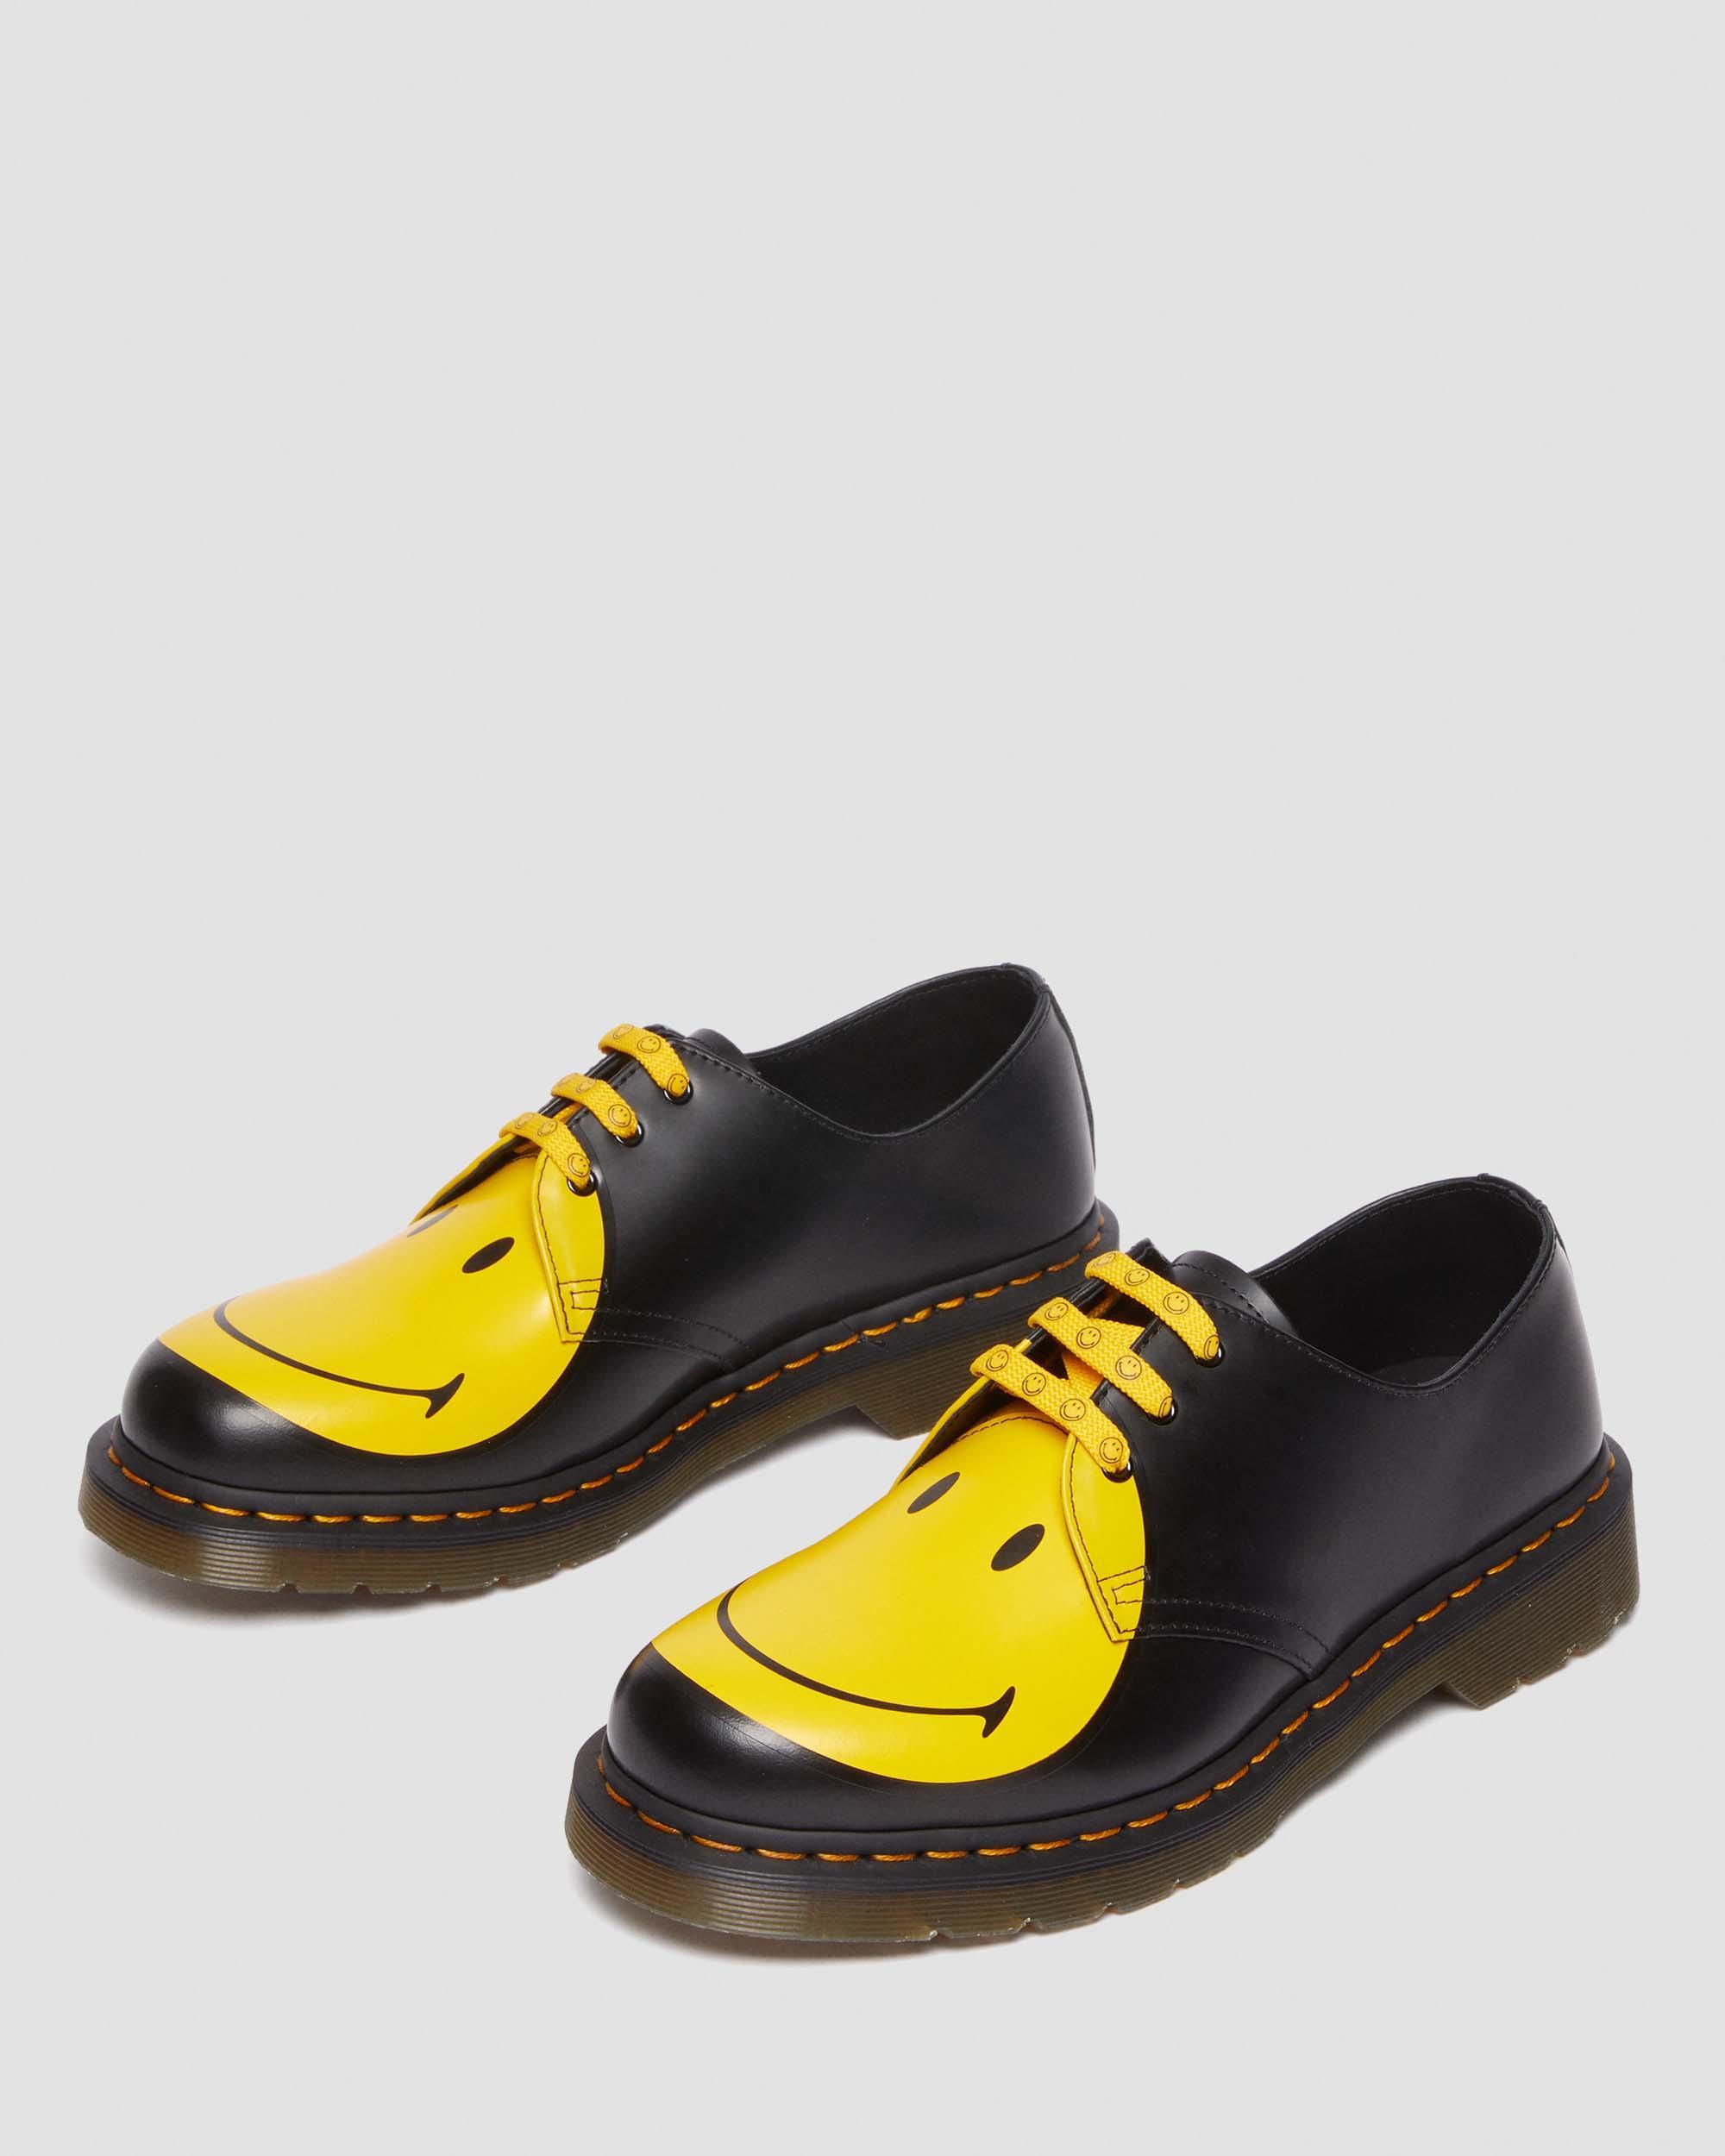 Dr. Martens 1461 Smiley® Smooth Leather Oxford Shoes in Black | Lyst